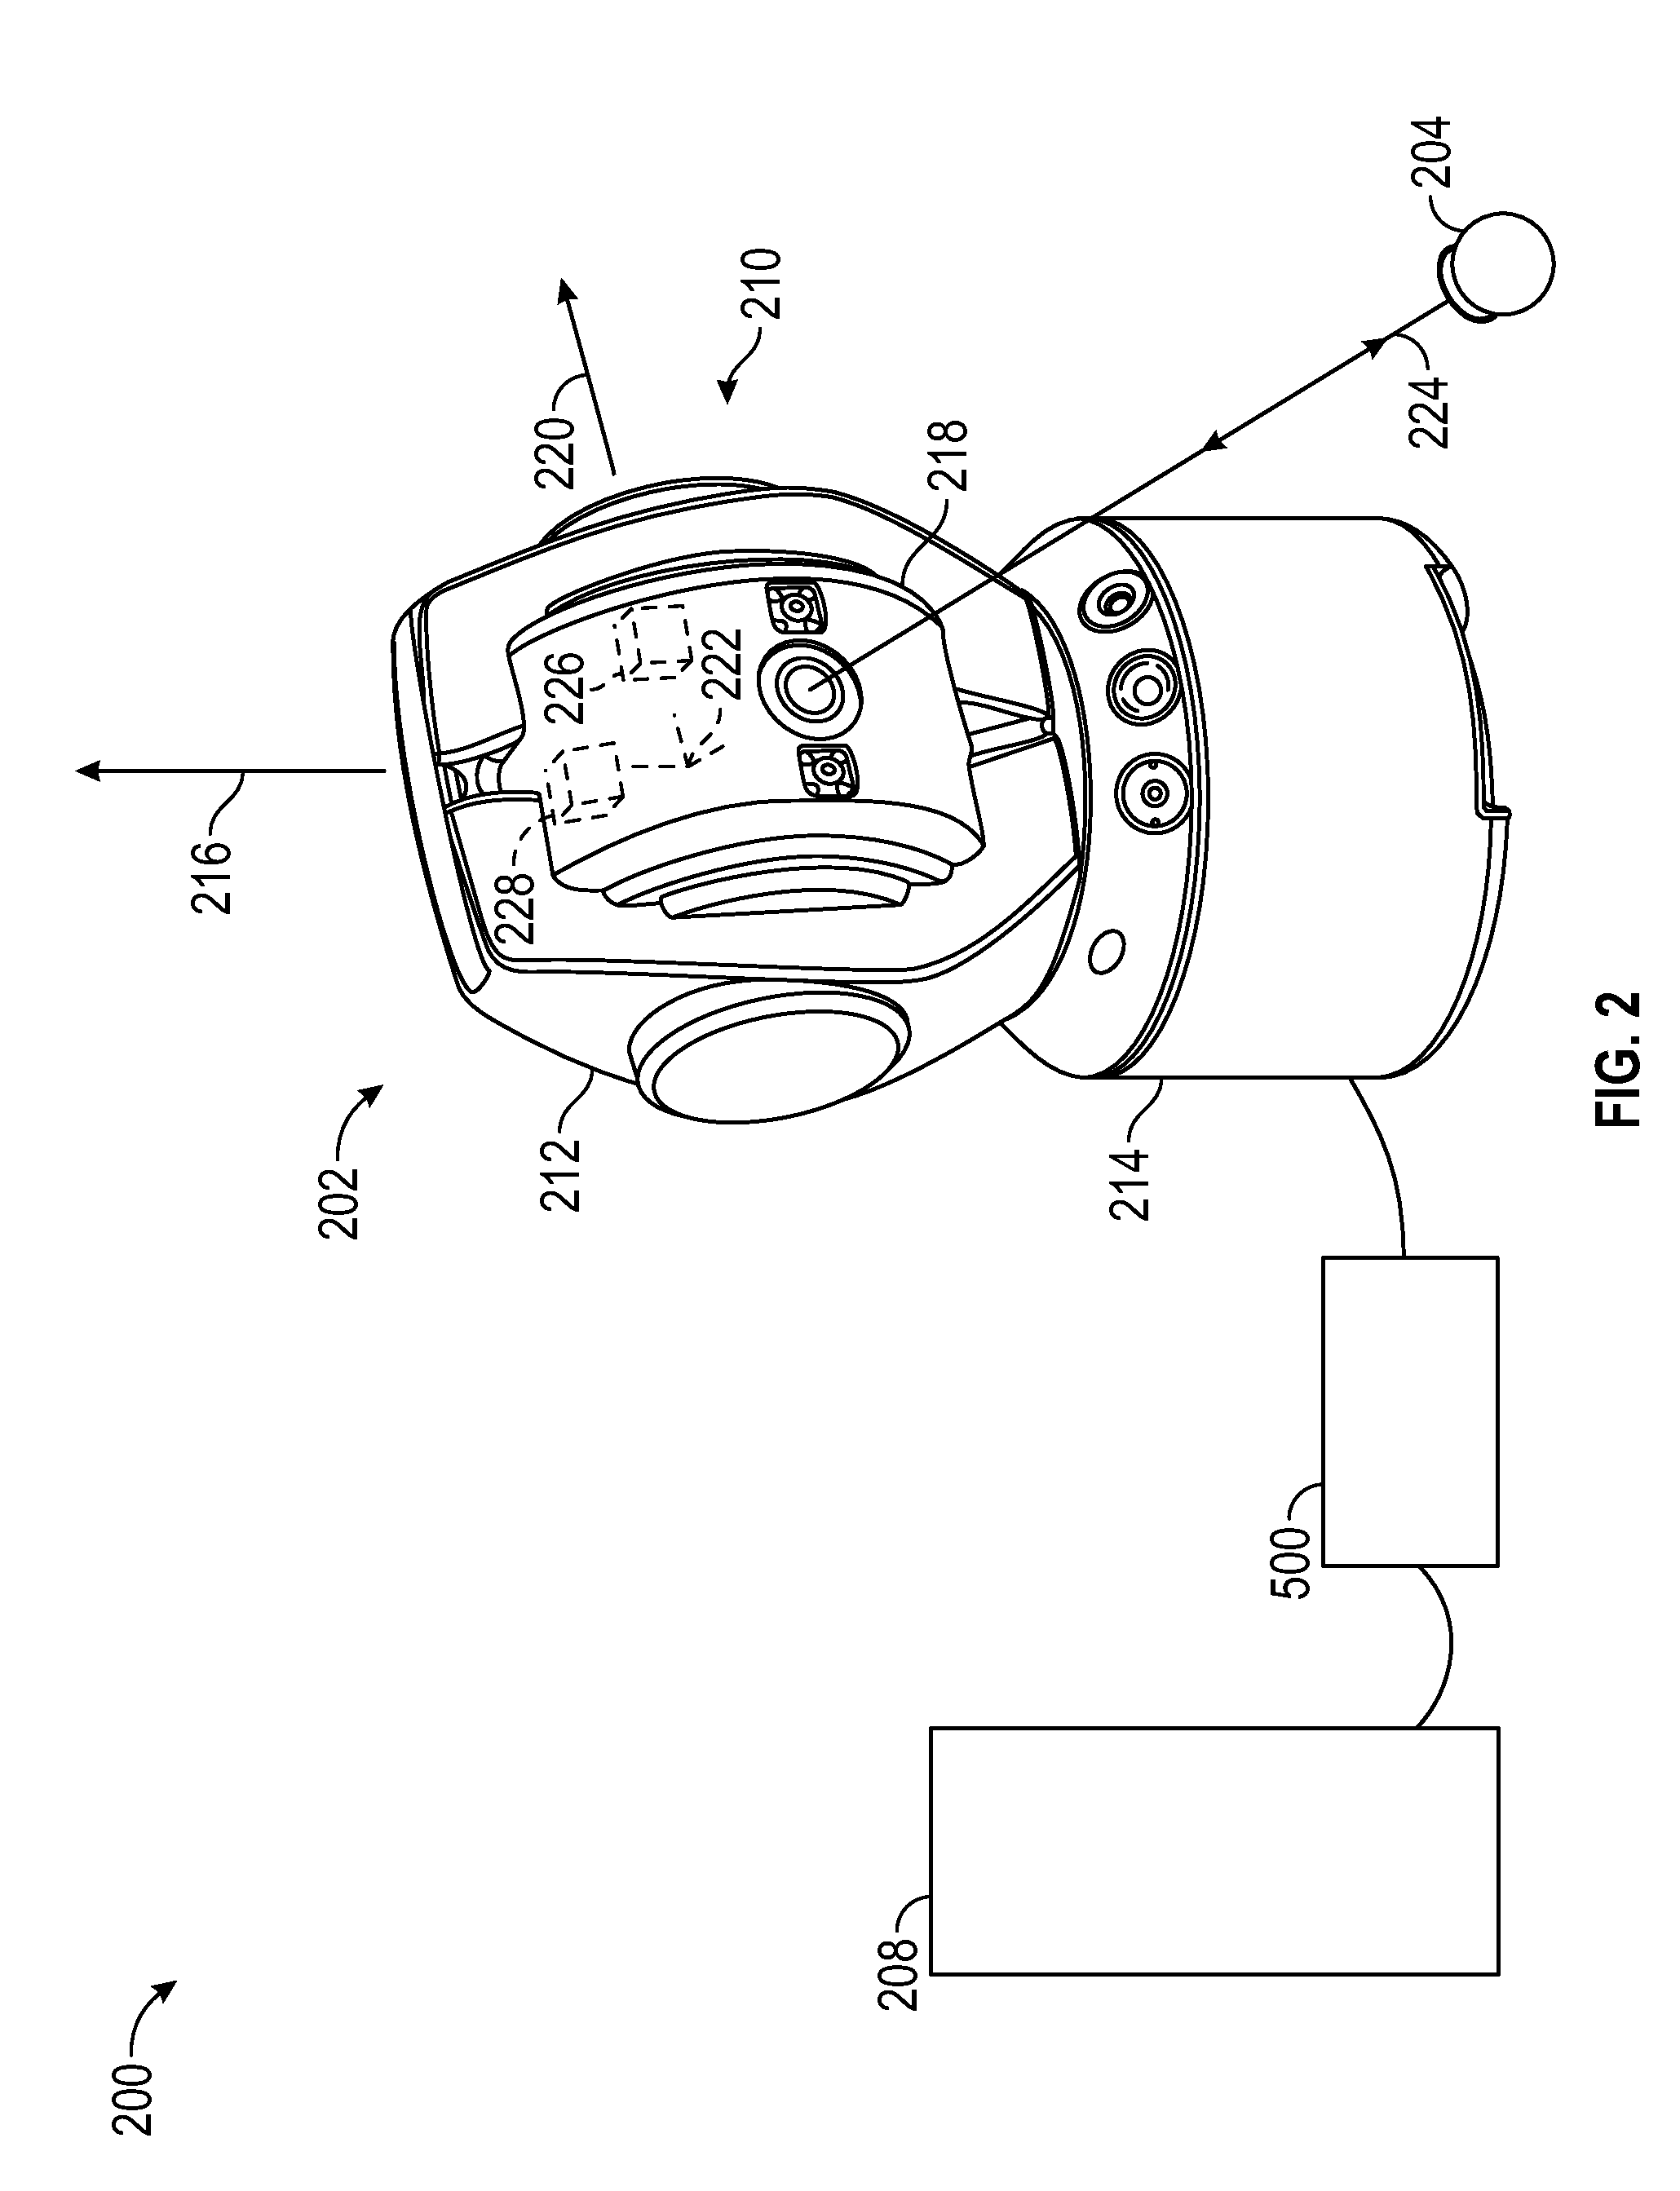 Metrology instrument system and method of operating